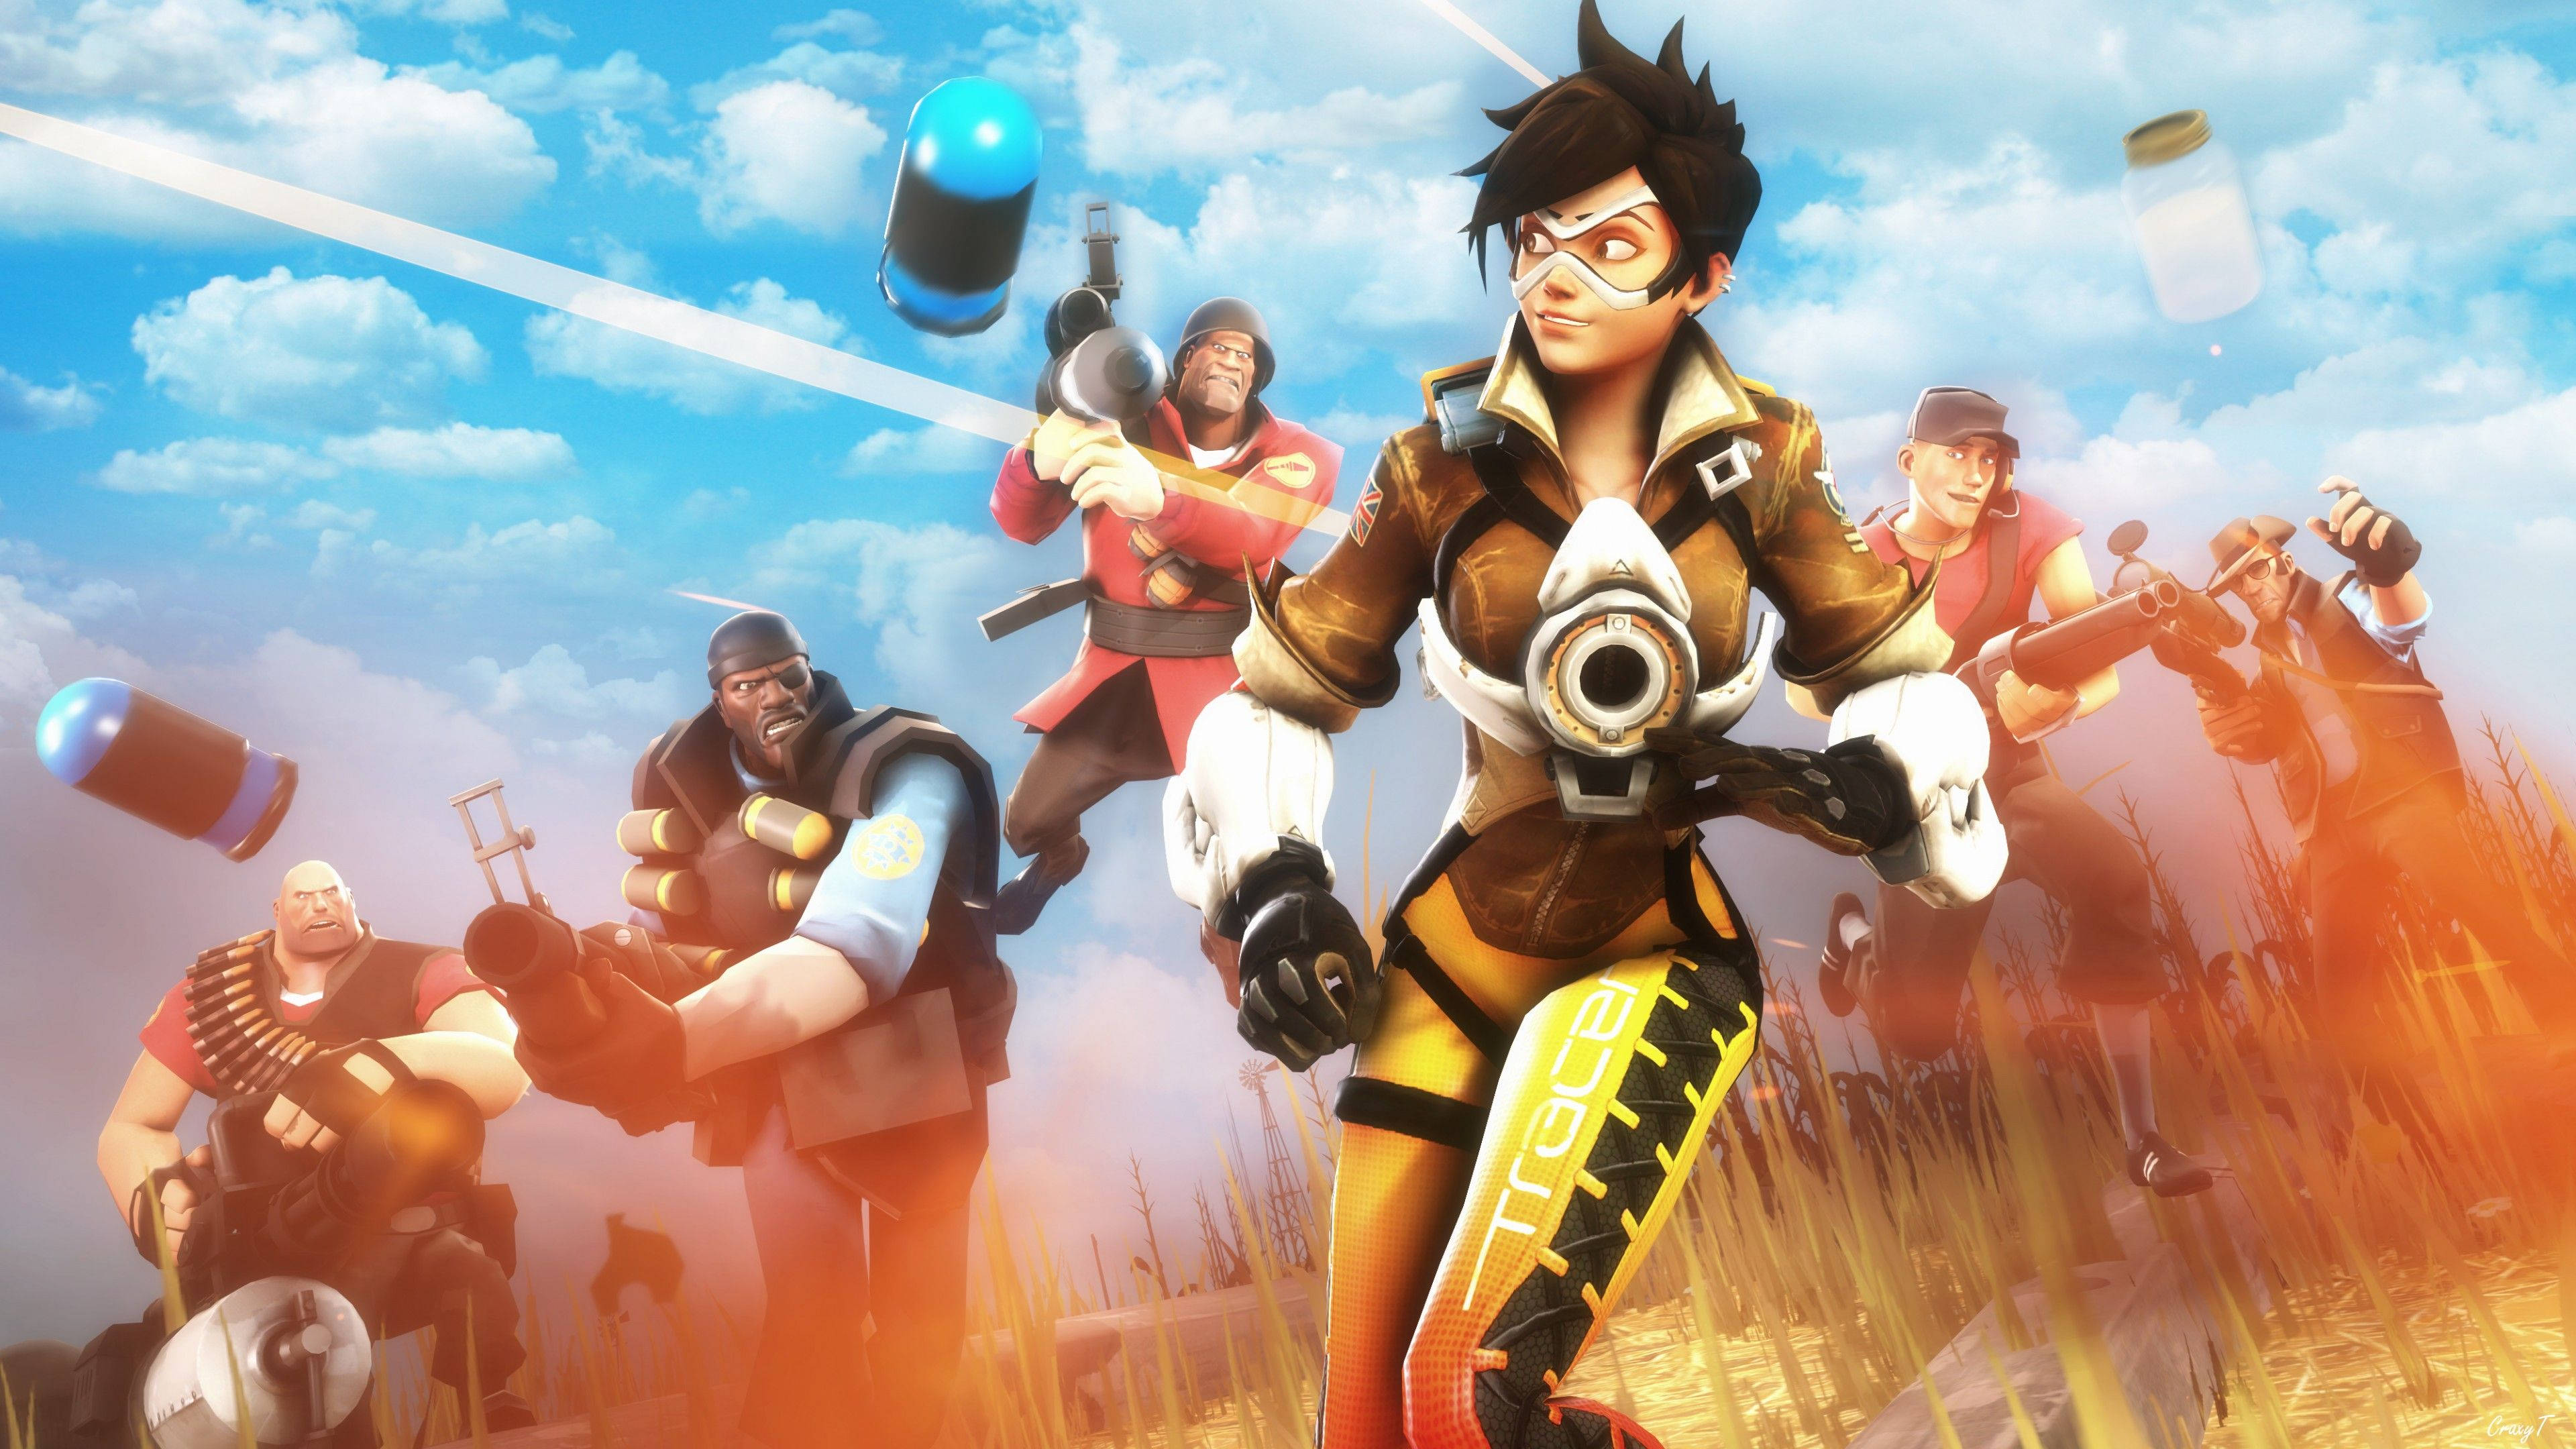 Tf2 Team Vs. Overwatch Tracer Background